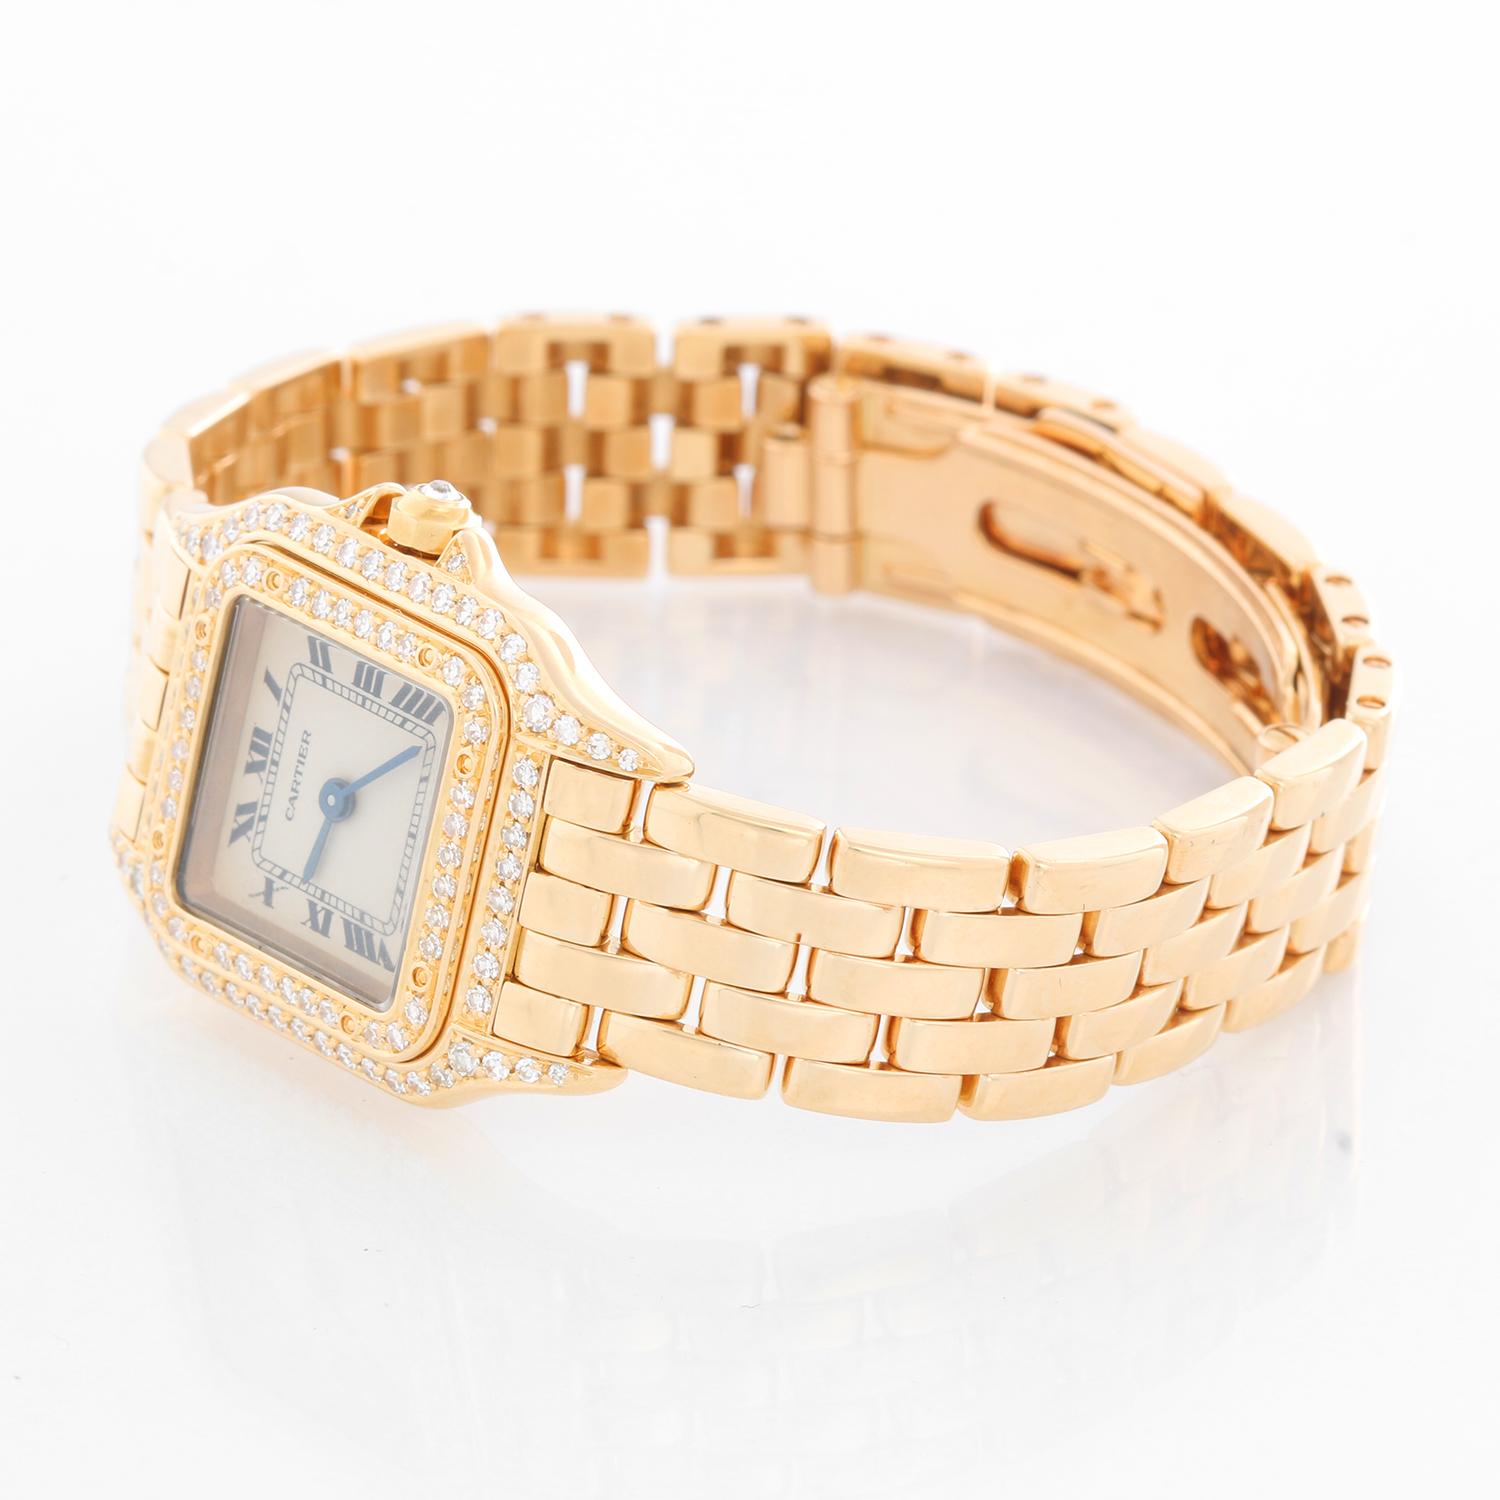 Cartier Panther Ladies 18k Yellow Gold Diamond Watch -  Quartz. 18k yellow gold case with factory diamond bezel (22mm x 30mm). Ivory colored dial with black Roman numerals. 18k yellow gold Panther bracelet. Pre-owned with Cartier box and book.